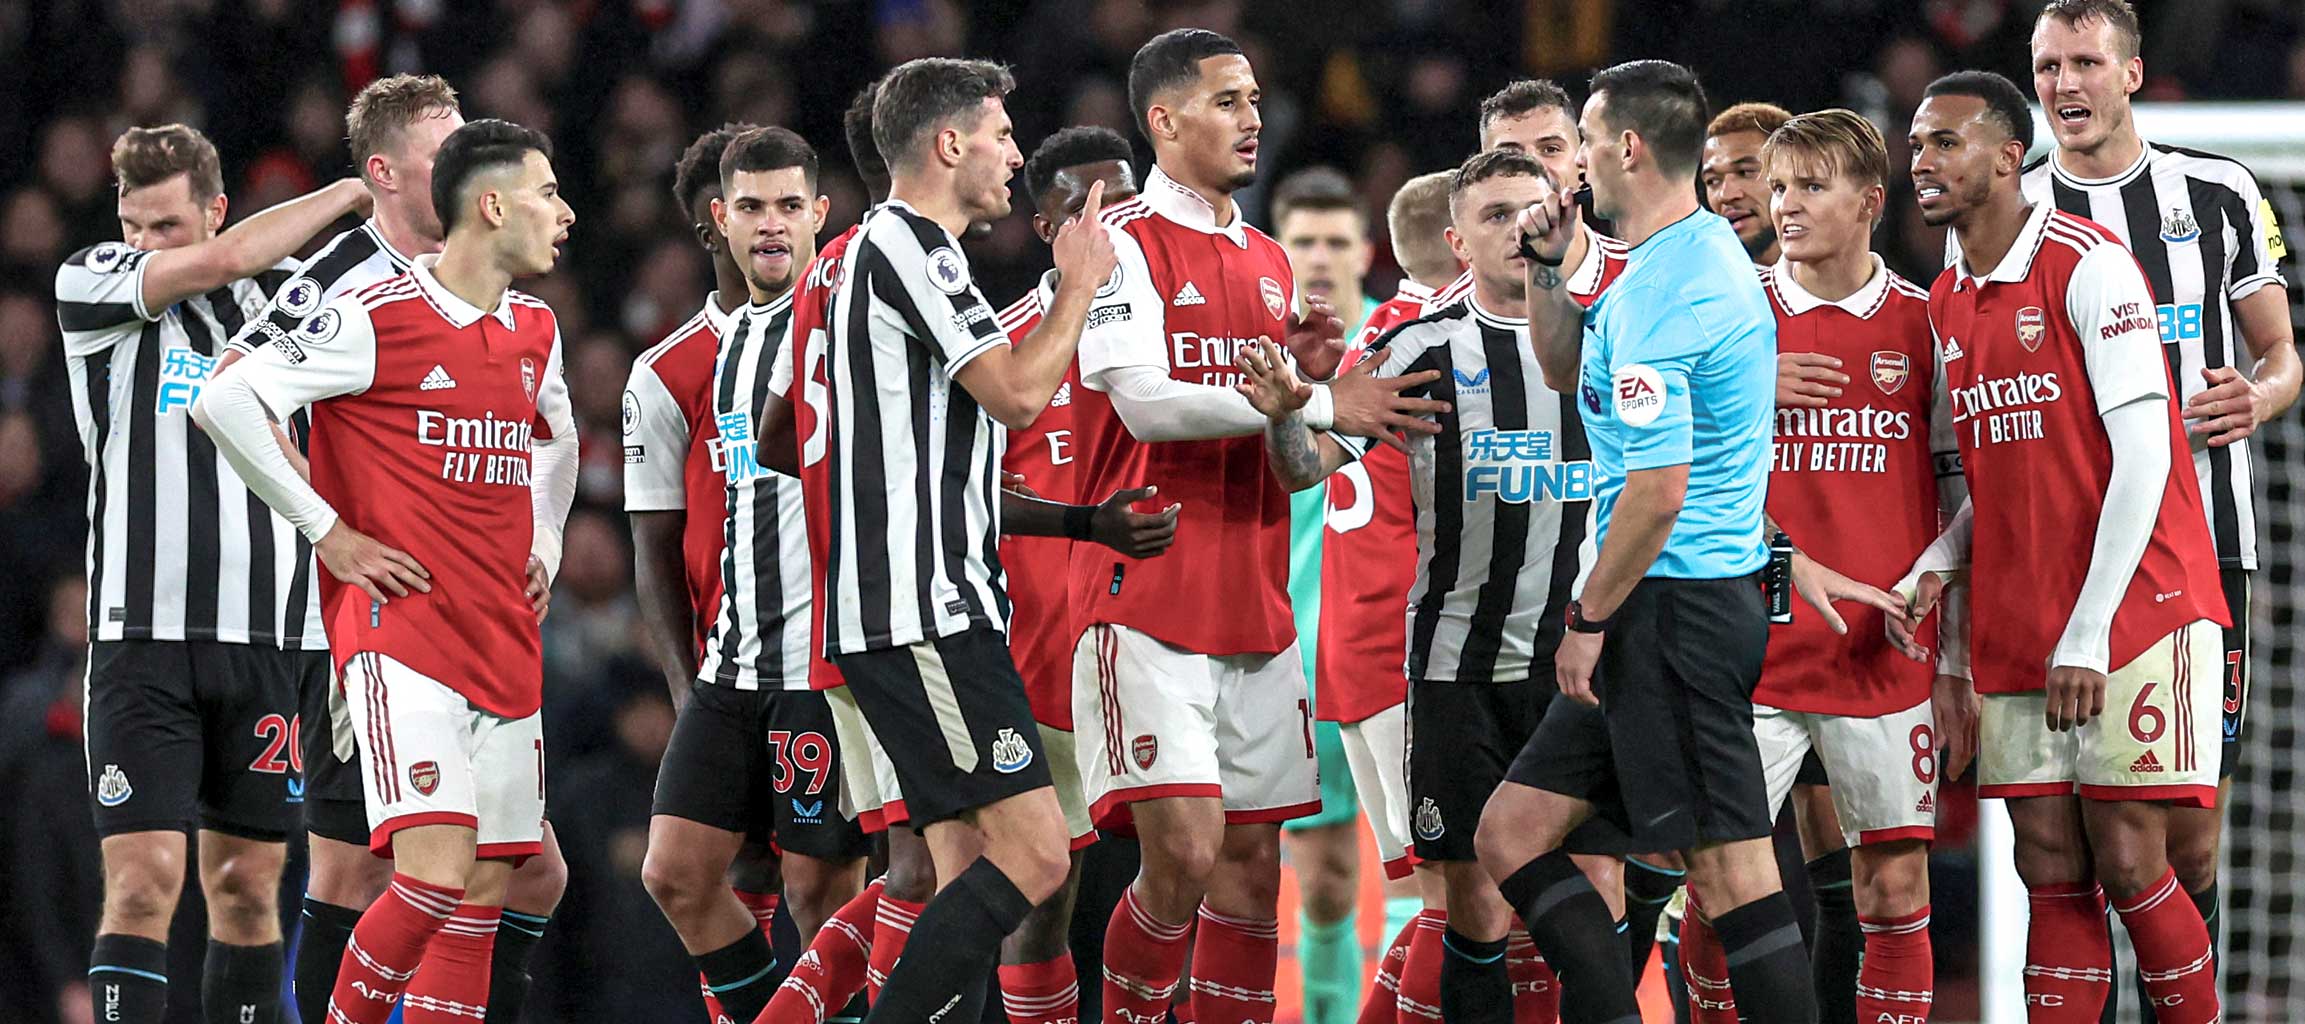 Arsenal 0 Newcastle 0 tactics: Zinchenko’s influence, wide pairs and Howe’s changes